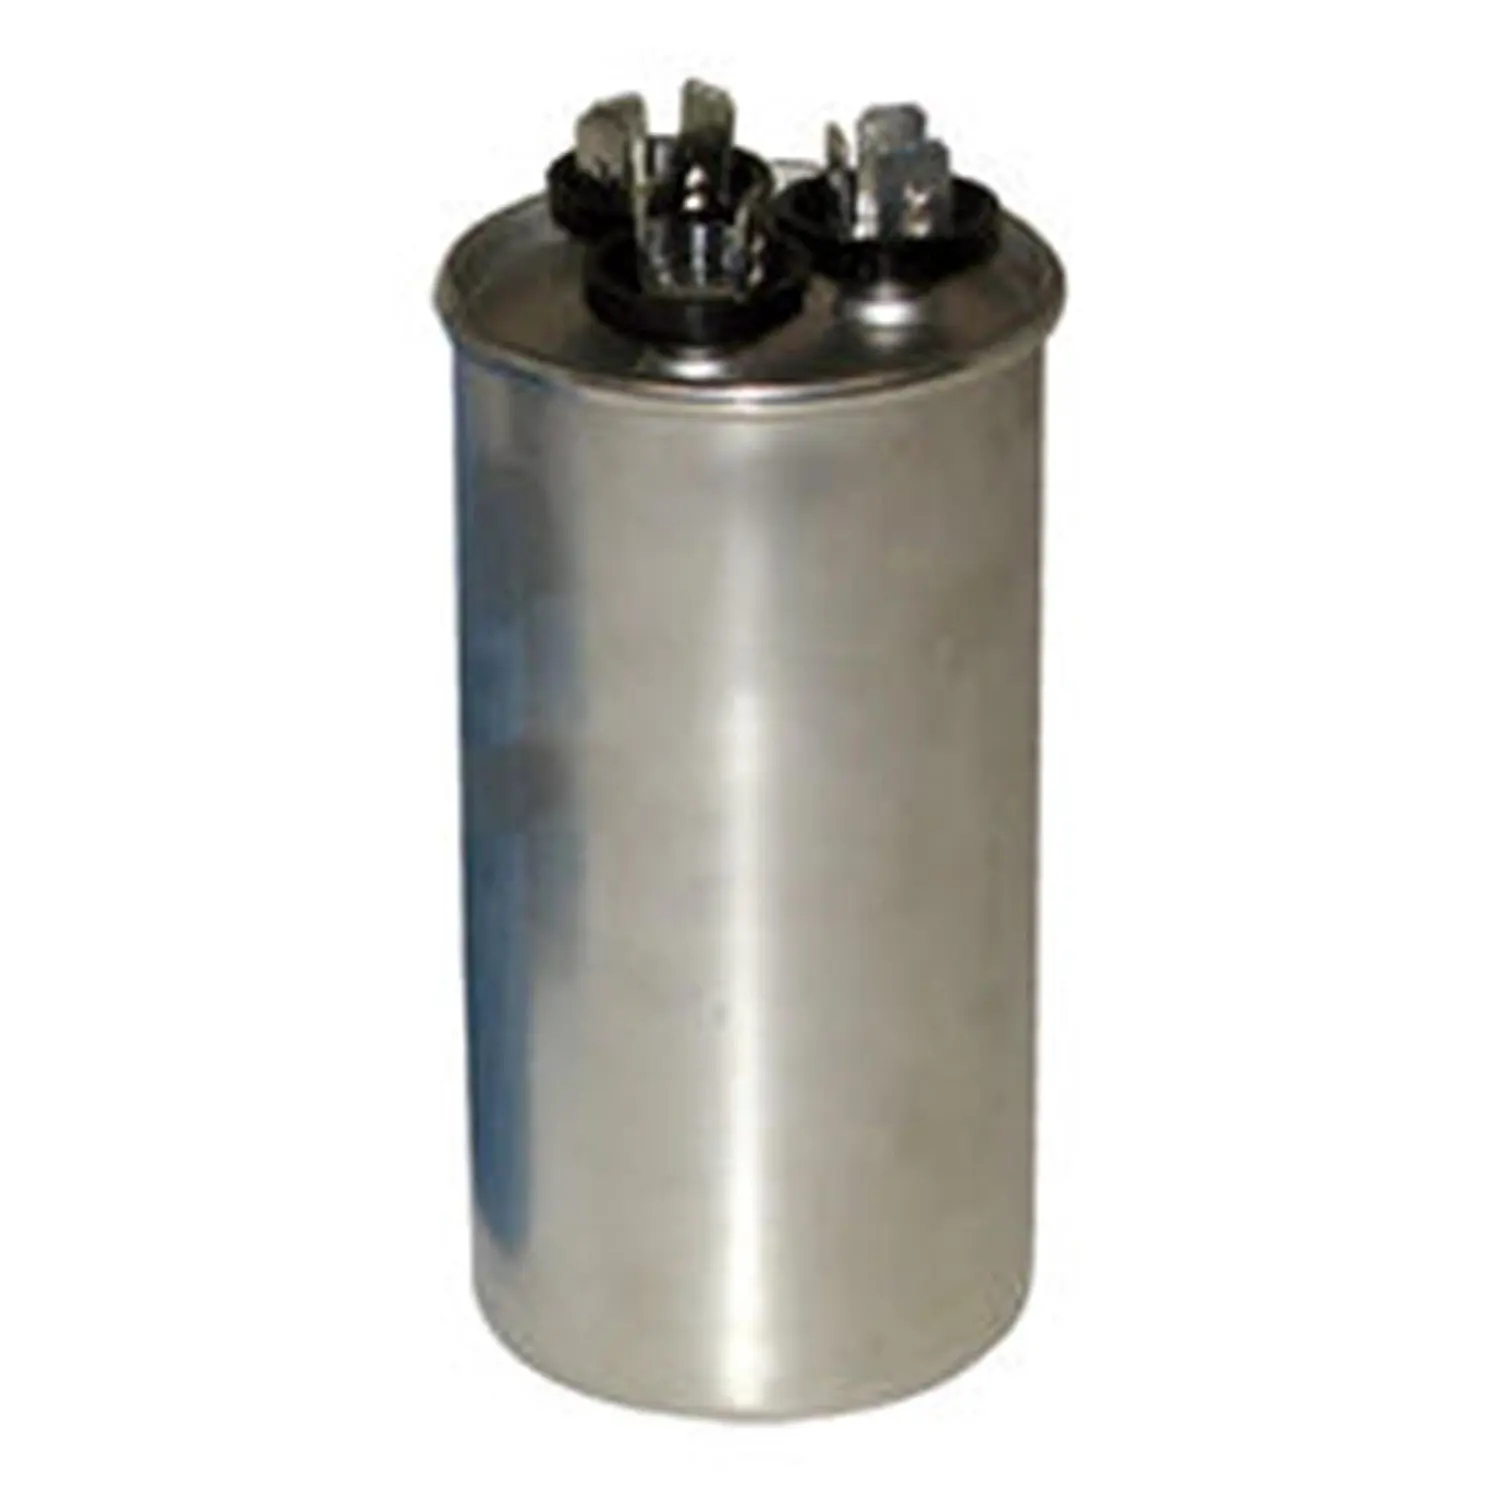 Oval, 10 MFD Midwest Hearth Motor Run Capacitor Single MFD Dual Voltage 370//440 Volts